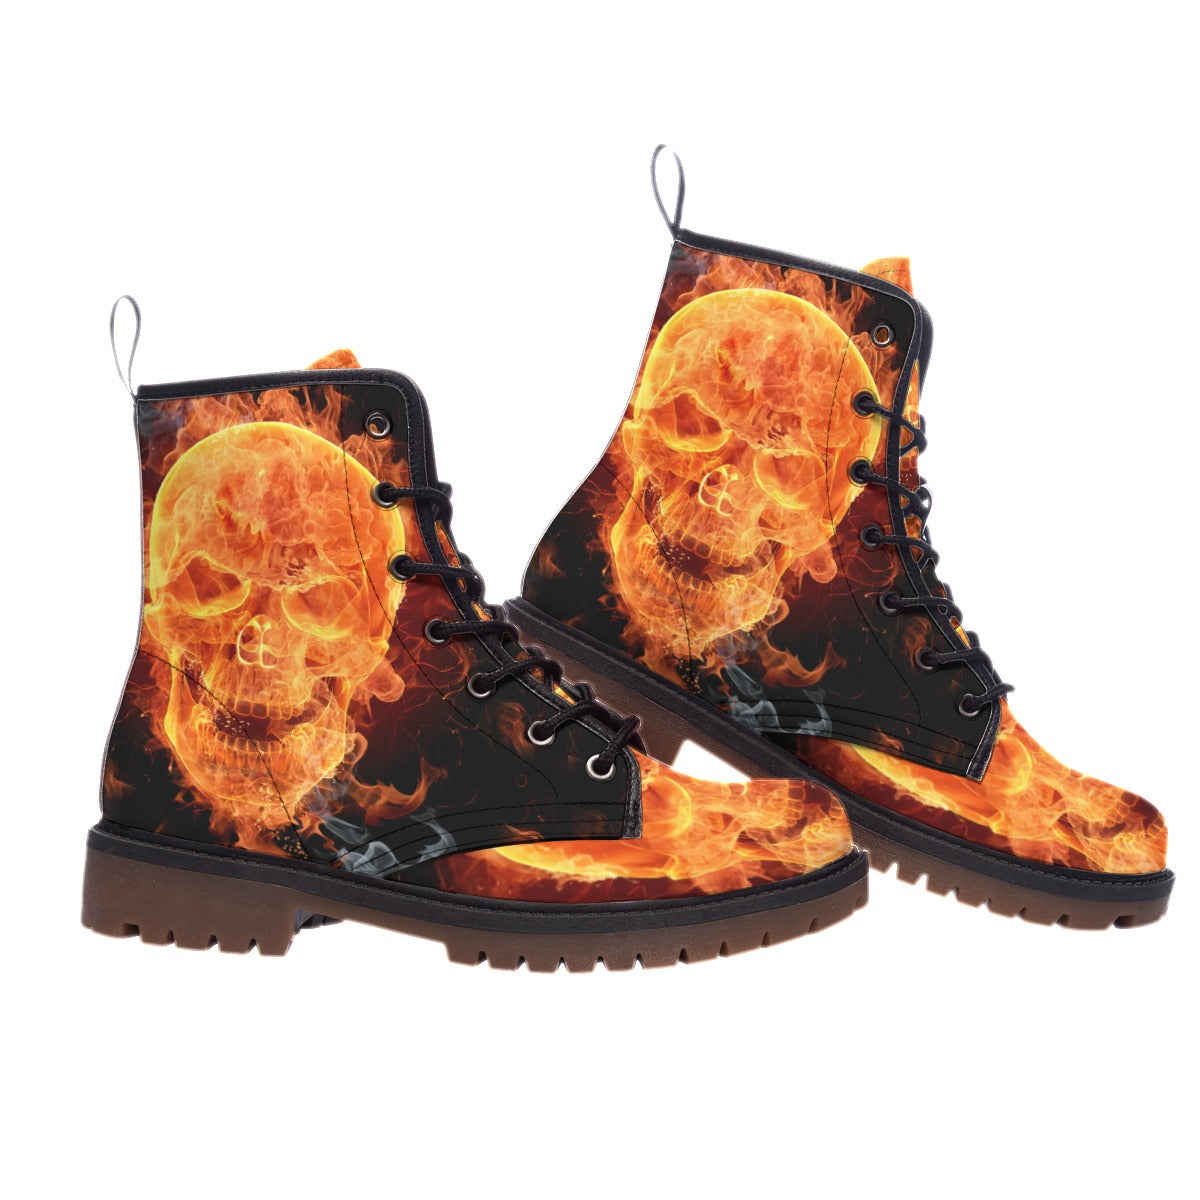 Flaming gothic skull men's boots, Halloween fire skeleton gothic boots shoes for men women